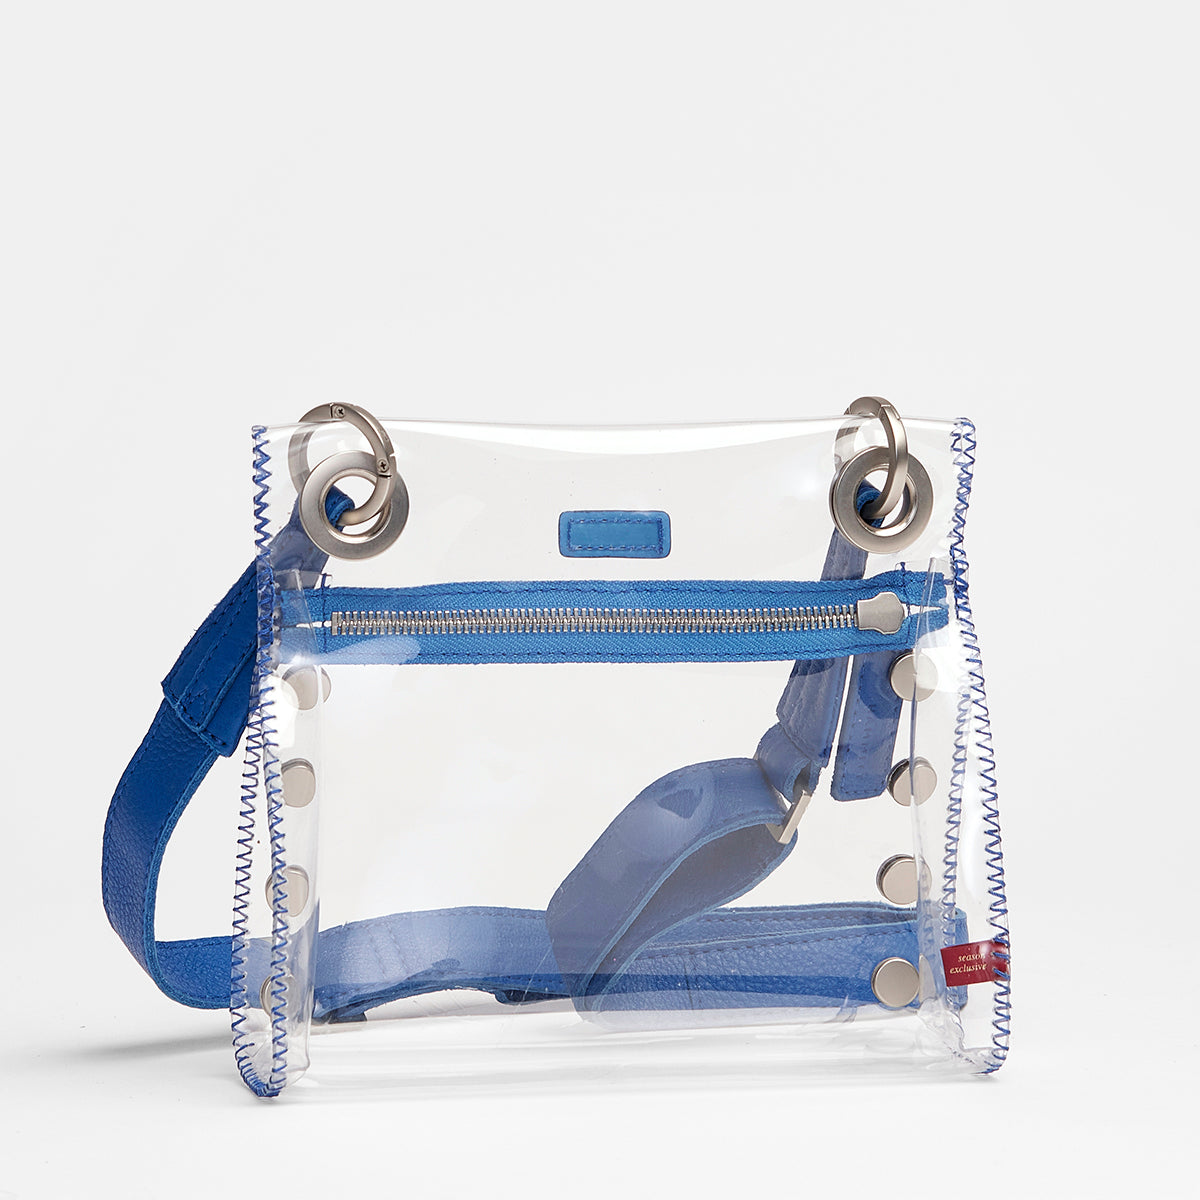 TONY SML STADIUM APPROVED CLEAR BAG - Southern Accents MS